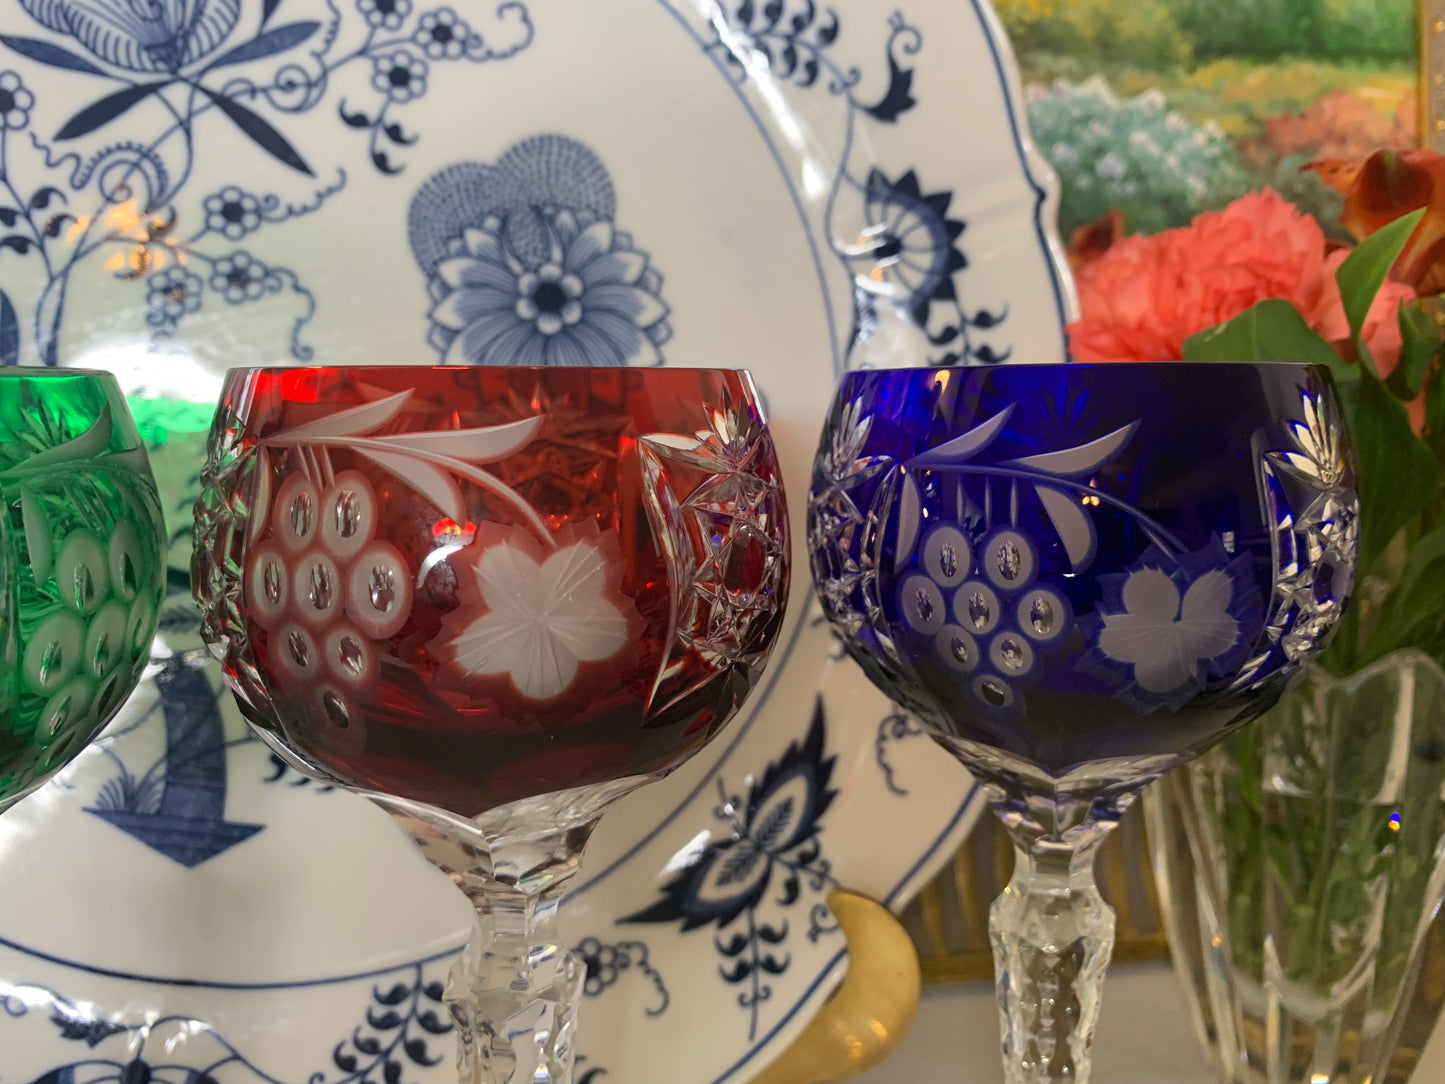 Stunning set of 4 colorful crystal tall wine glasses! Excellent condition!